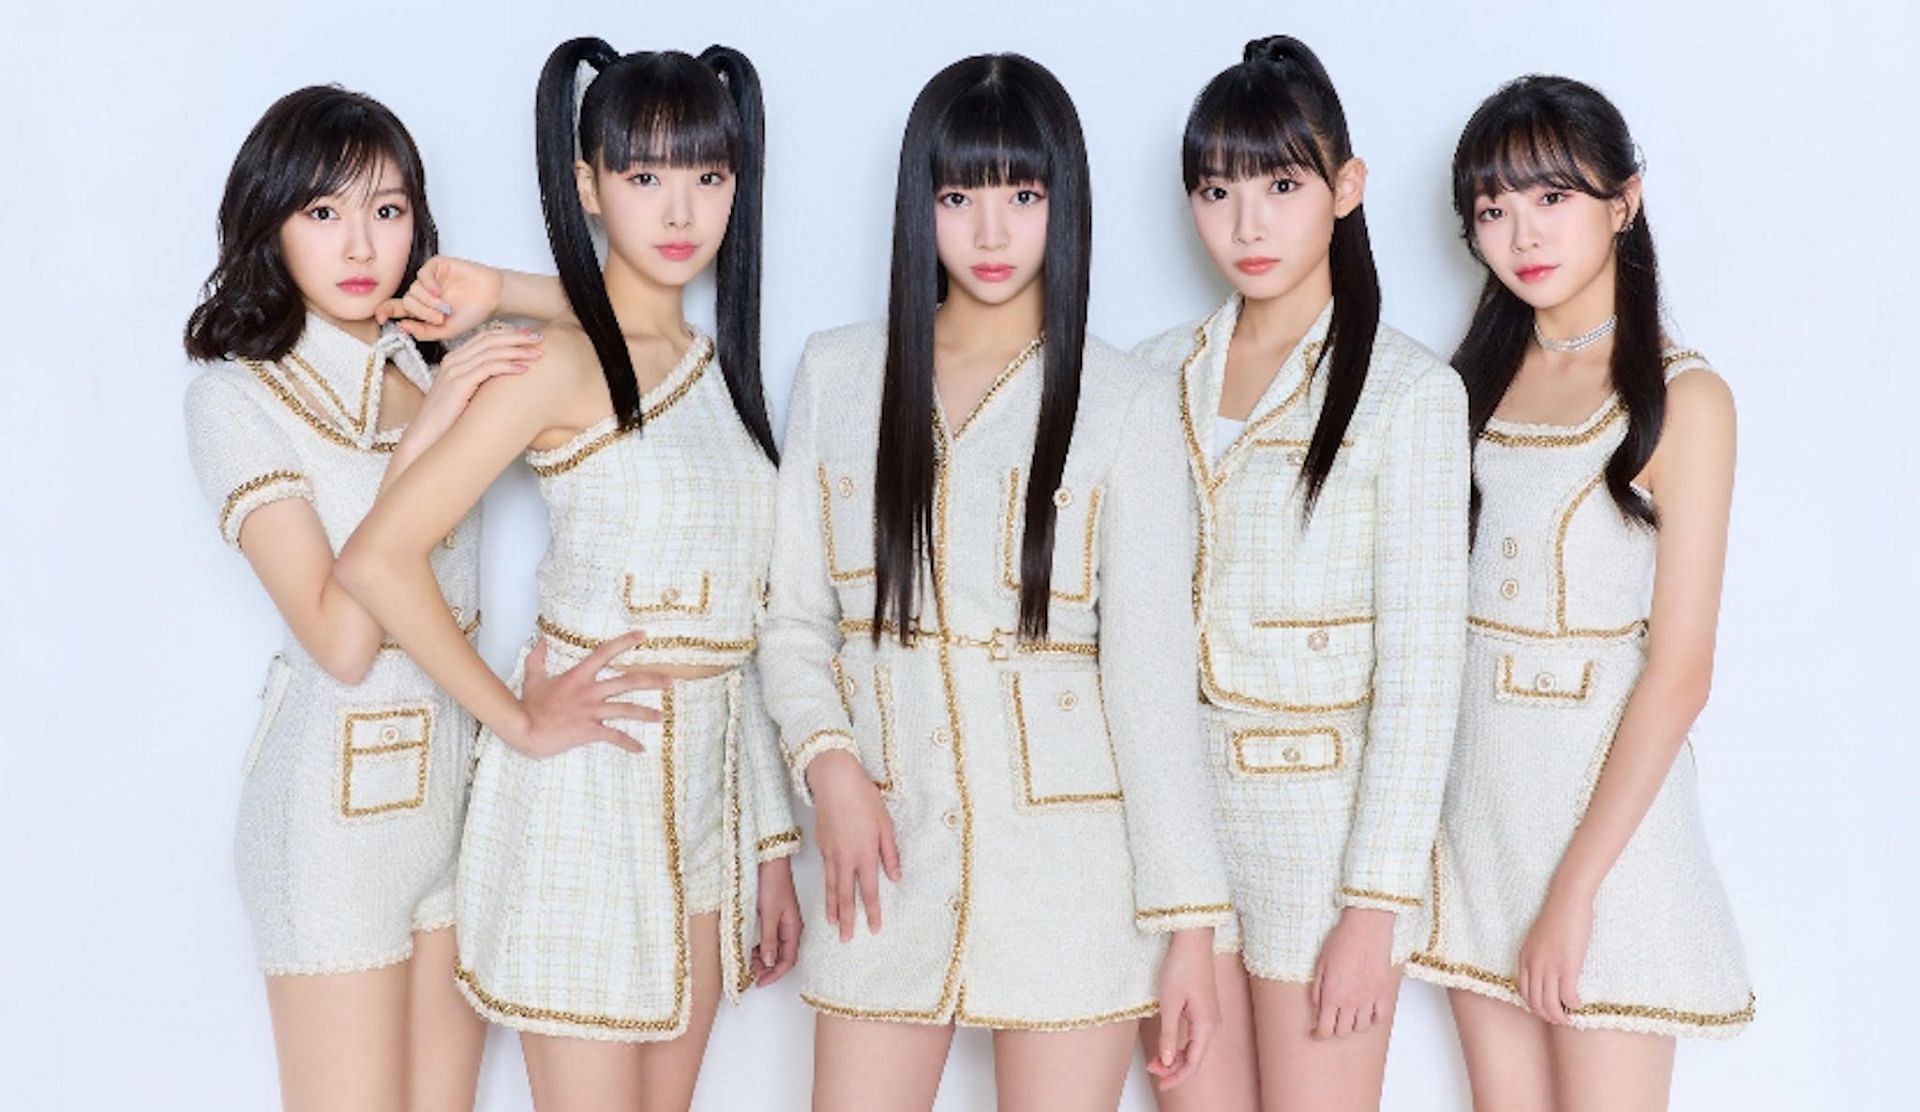 PRIKIL is a newly-formed Japanese girl group (Image via Twitter/@PRIKIL_OFFICIAL)